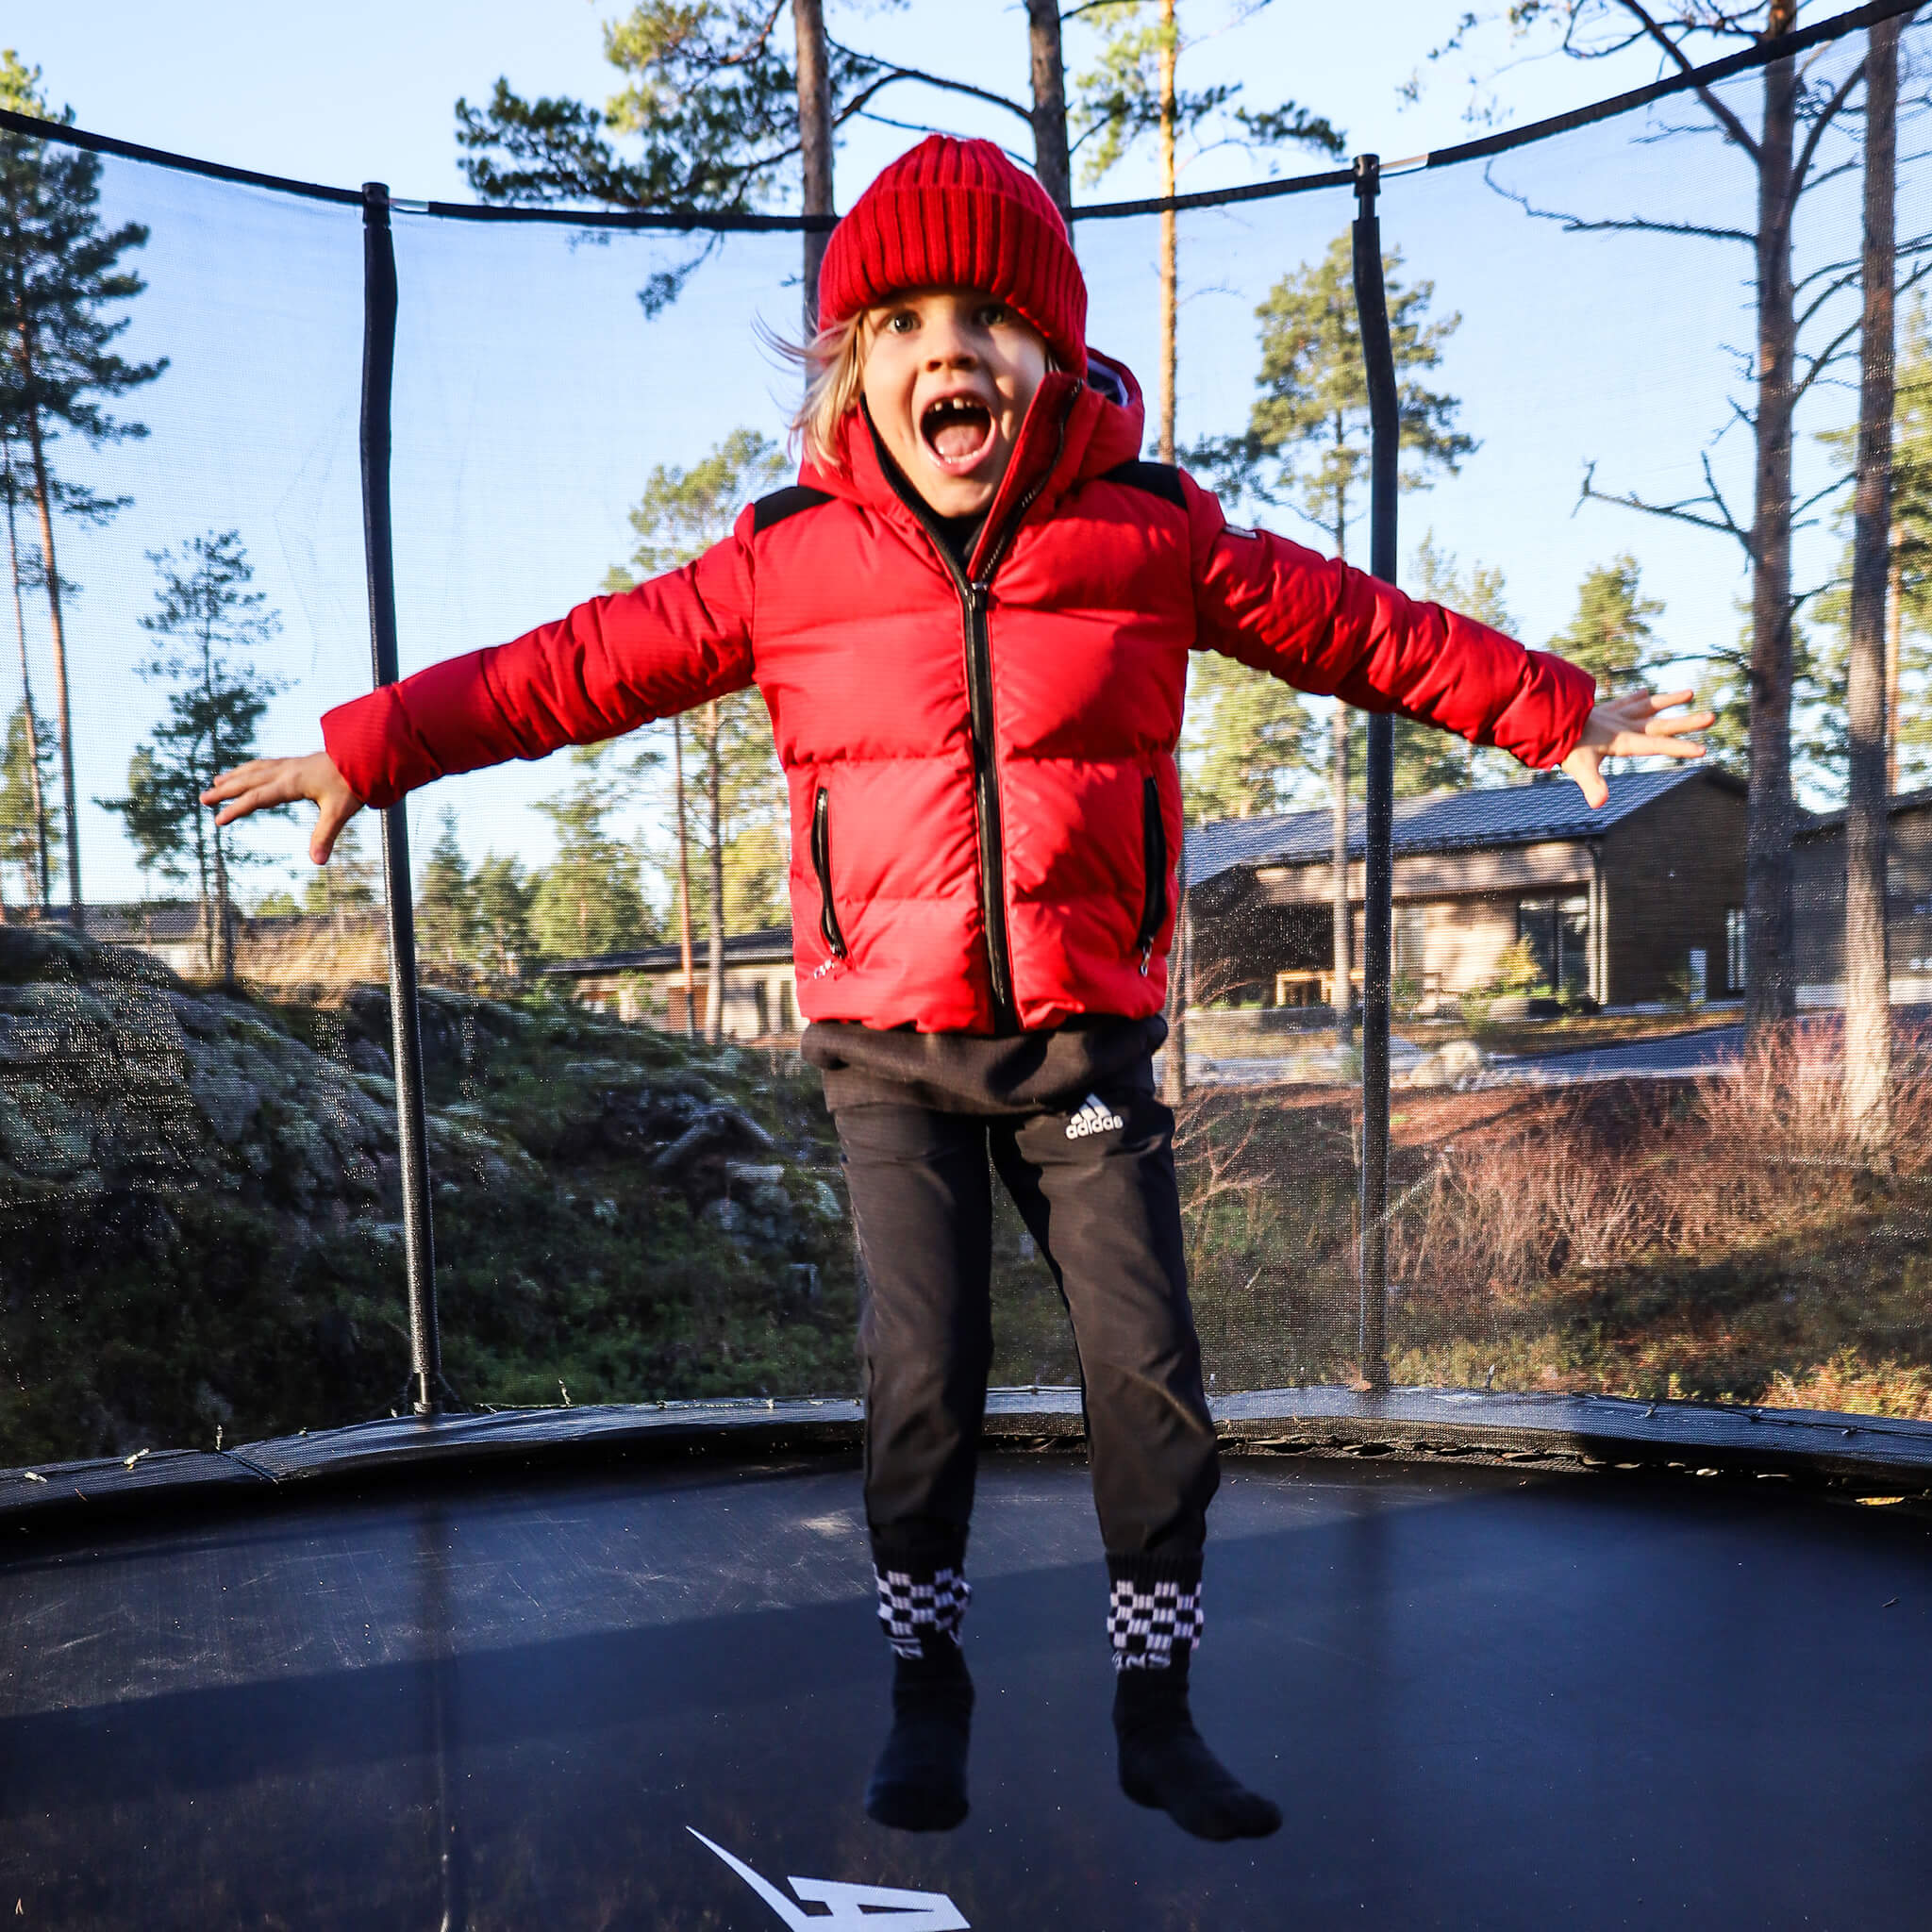 A girl in a red jacket jumps on an Acon trampoline.